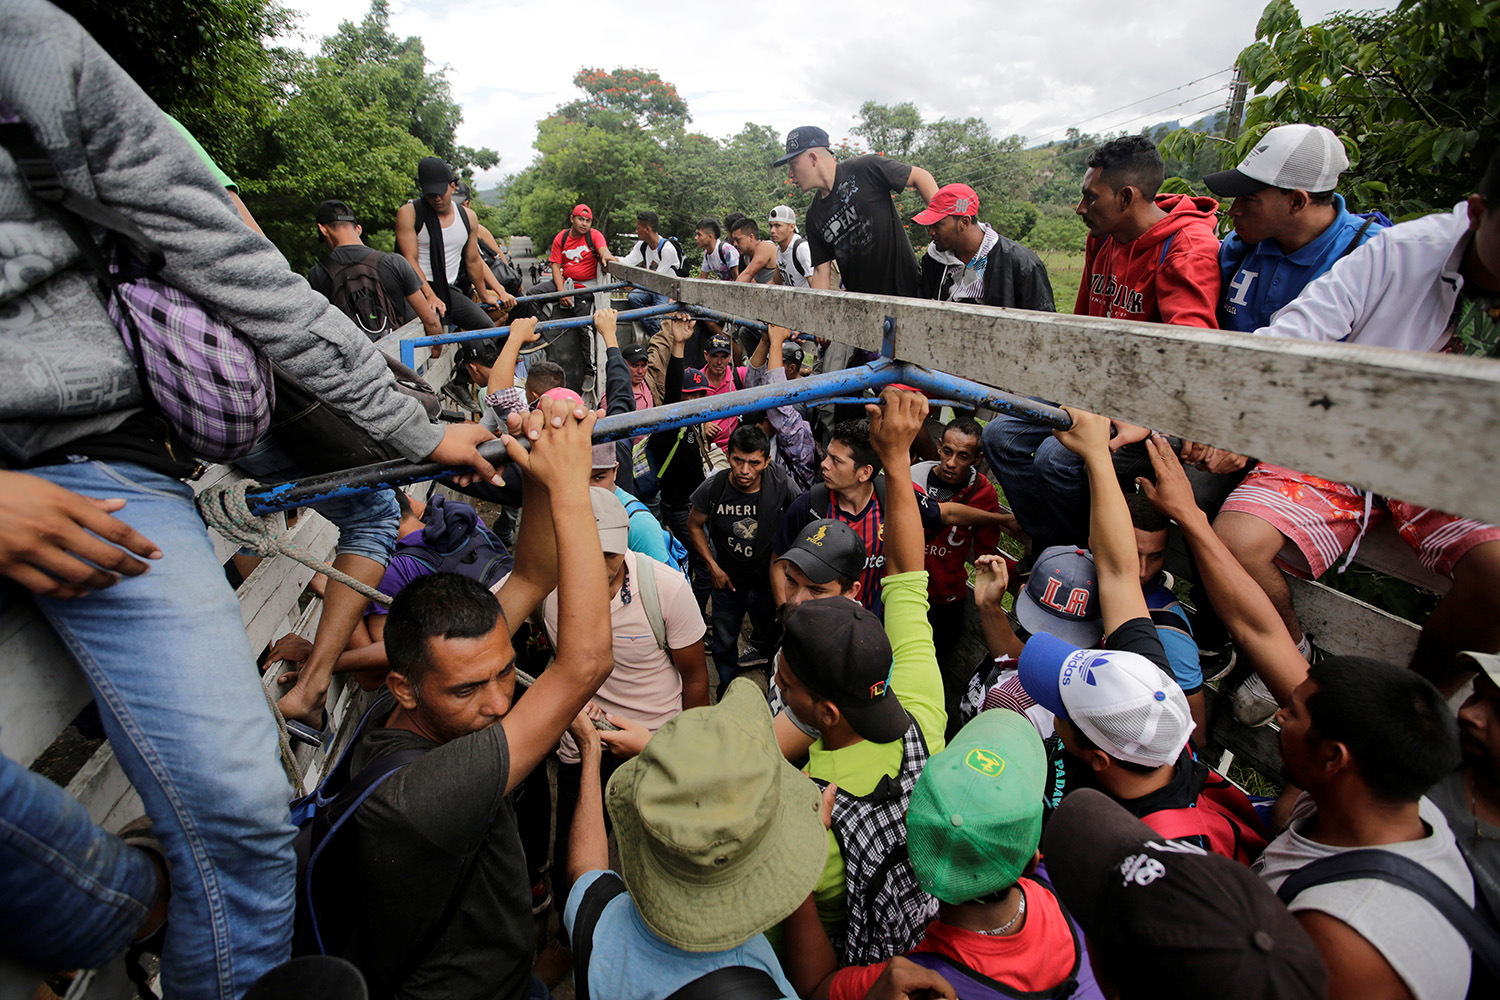 Honduran migrants board trucks sending them back to Honduras, after they crossed the border into Guatemala illegally in their bid to reach the U.S., in Agua Caliente, Guatemala October 17, 2018. REUTERS/Jorge Cabrera